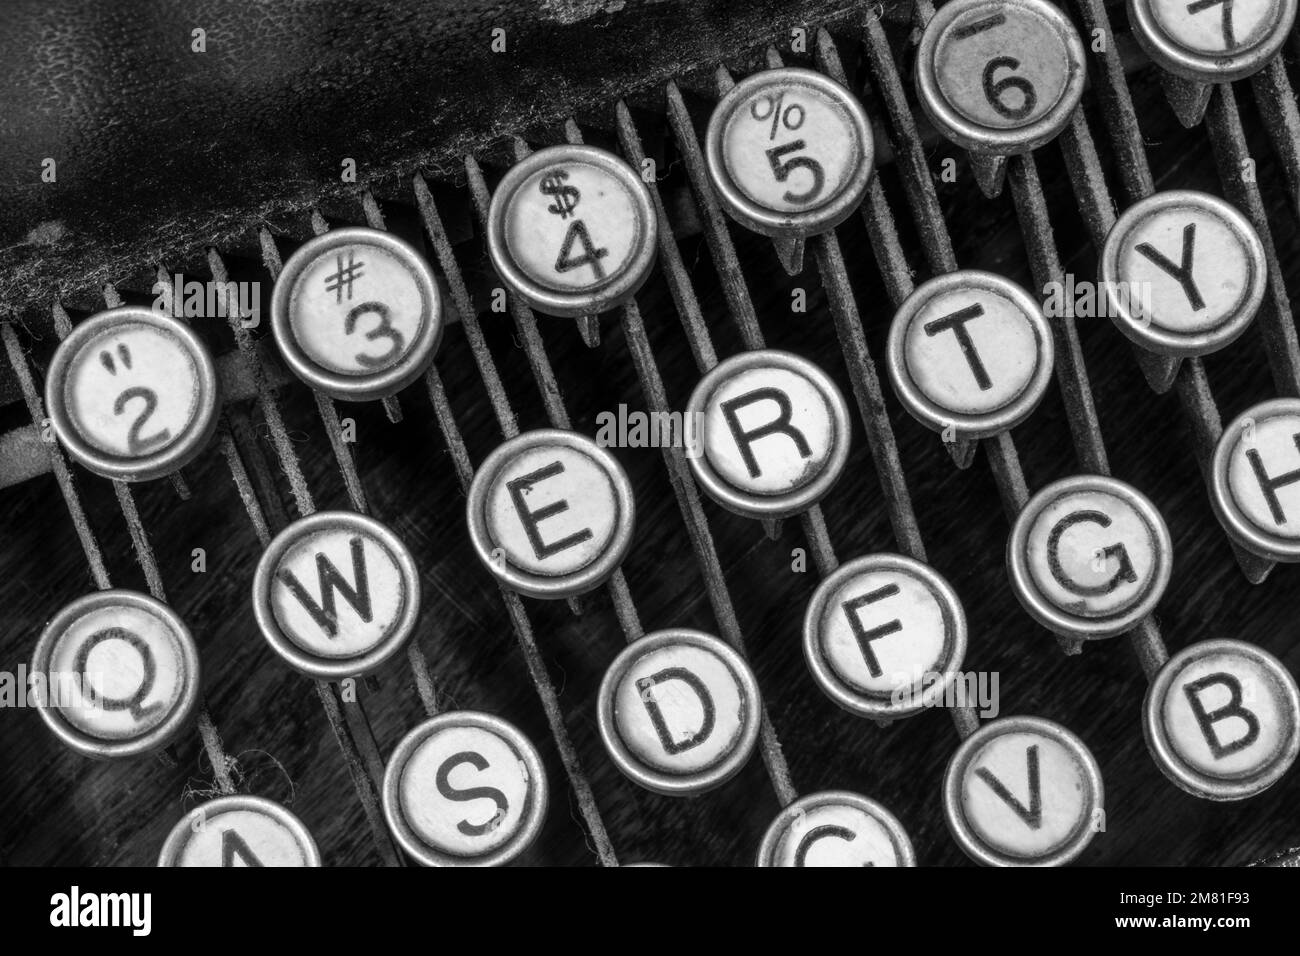 Antique typewriter showing traditional QWERTY keys. Before text messaging, people used typewriters to communicate by writing letters. Stock Photo